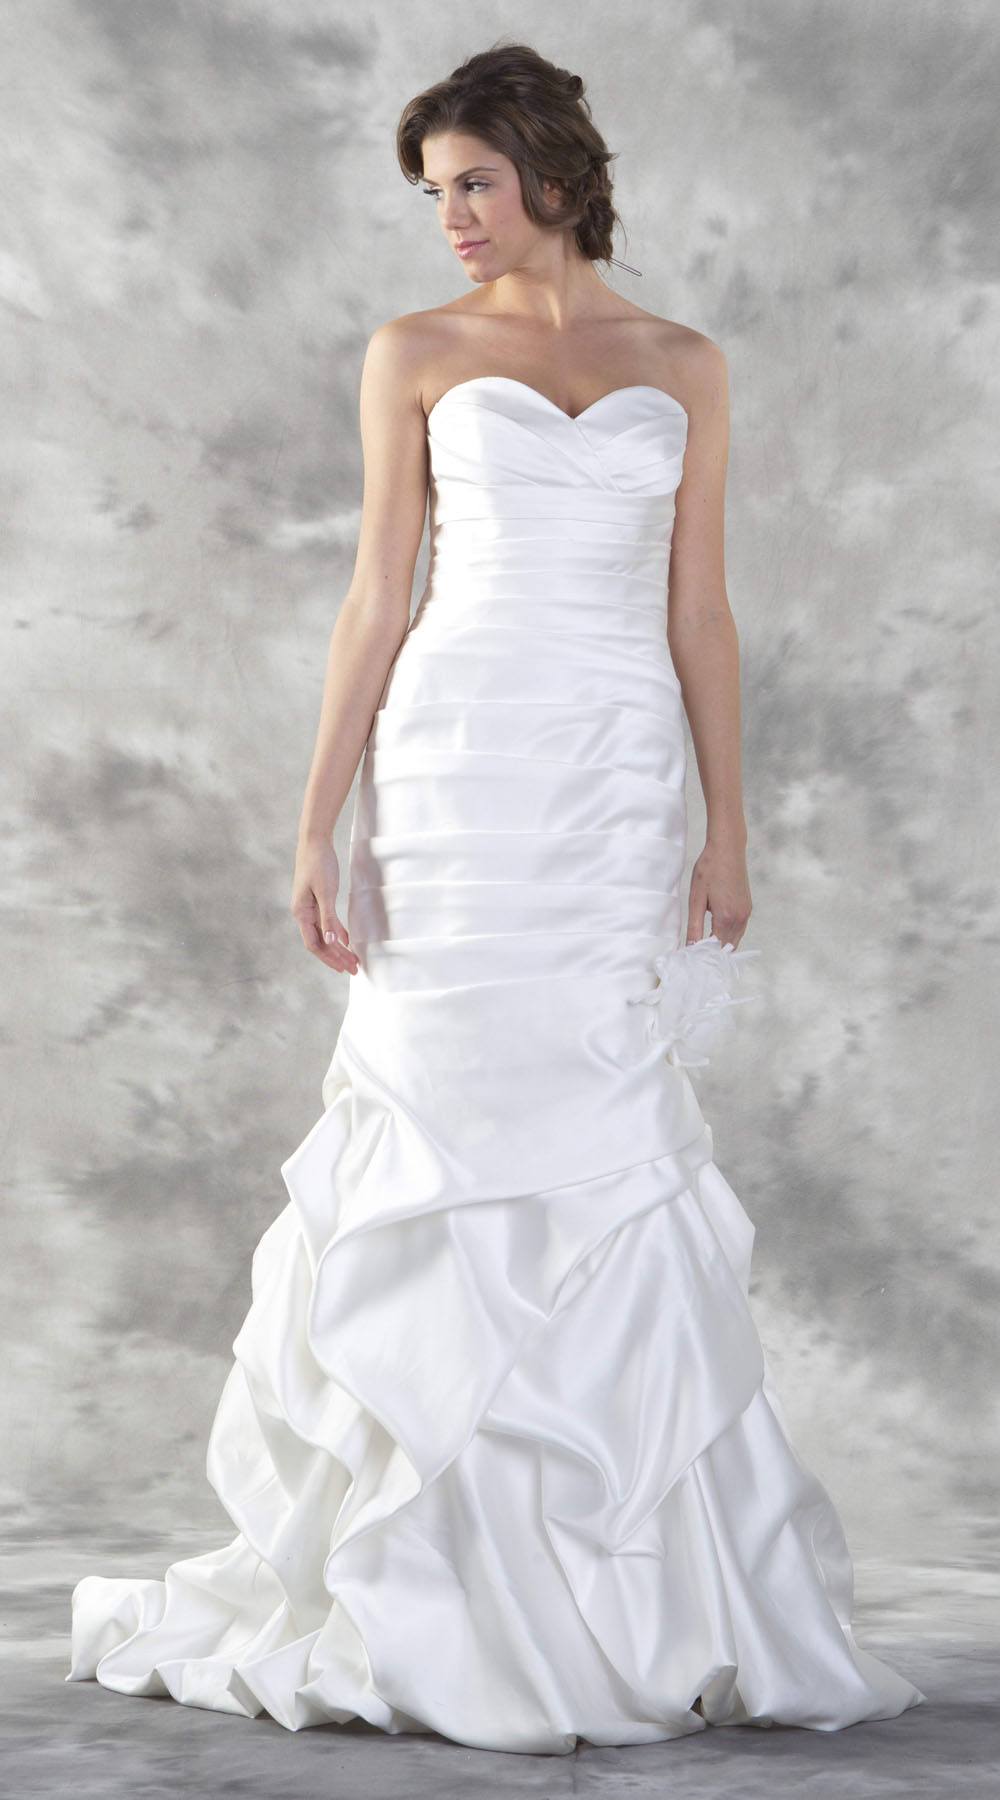 Ivory Mermaid Style Strapless Wedding Gown Lace-Up Back